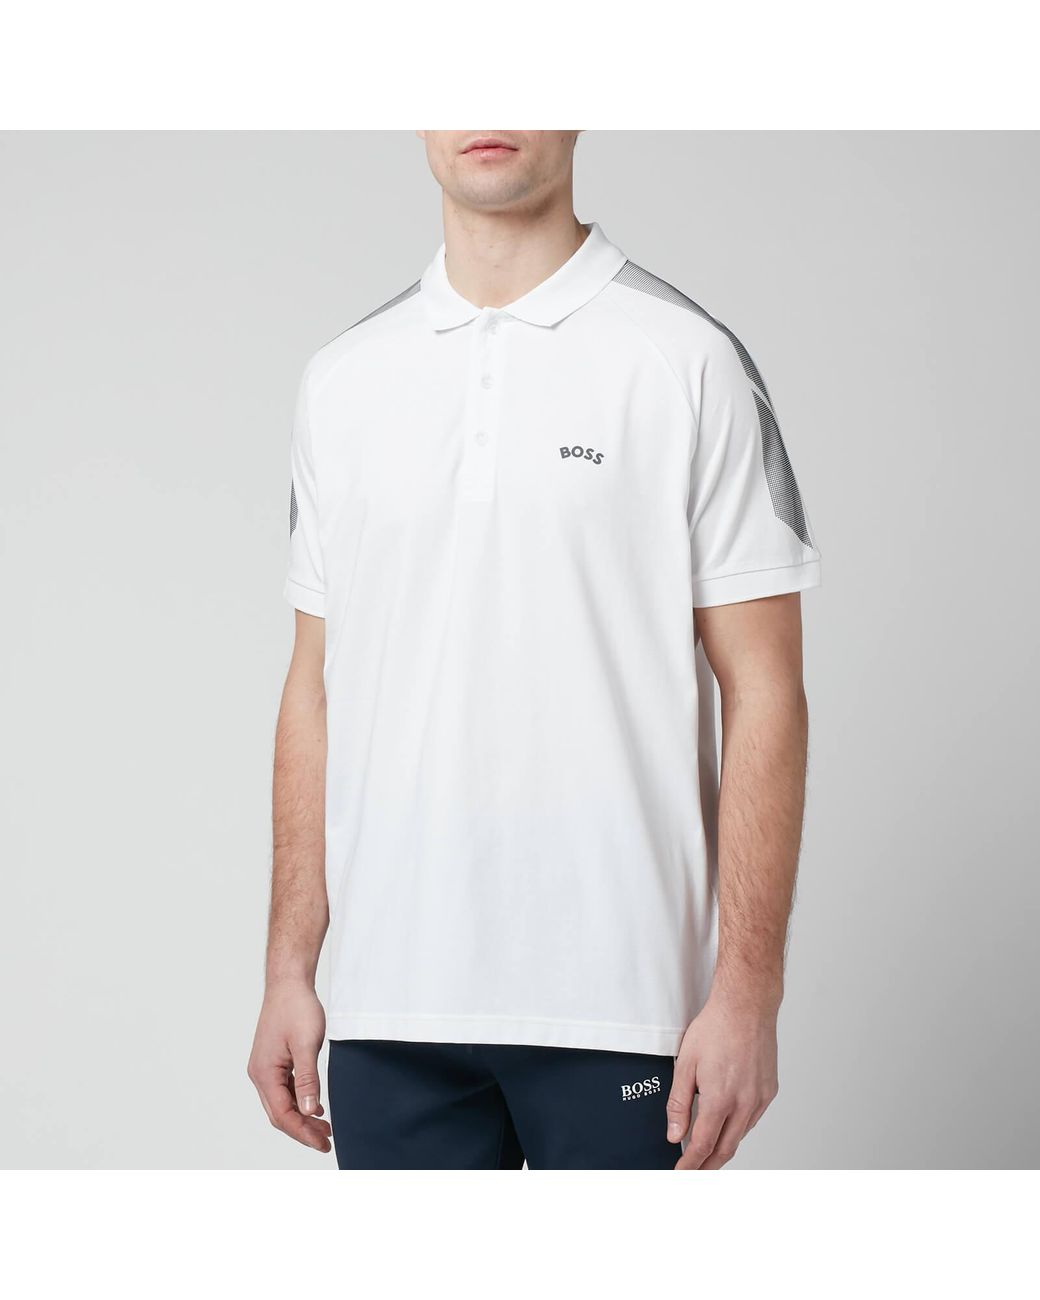 Mens Clothing T-shirts Polo shirts BOSS Athleisure Cotton Paule Polo in White for Men 